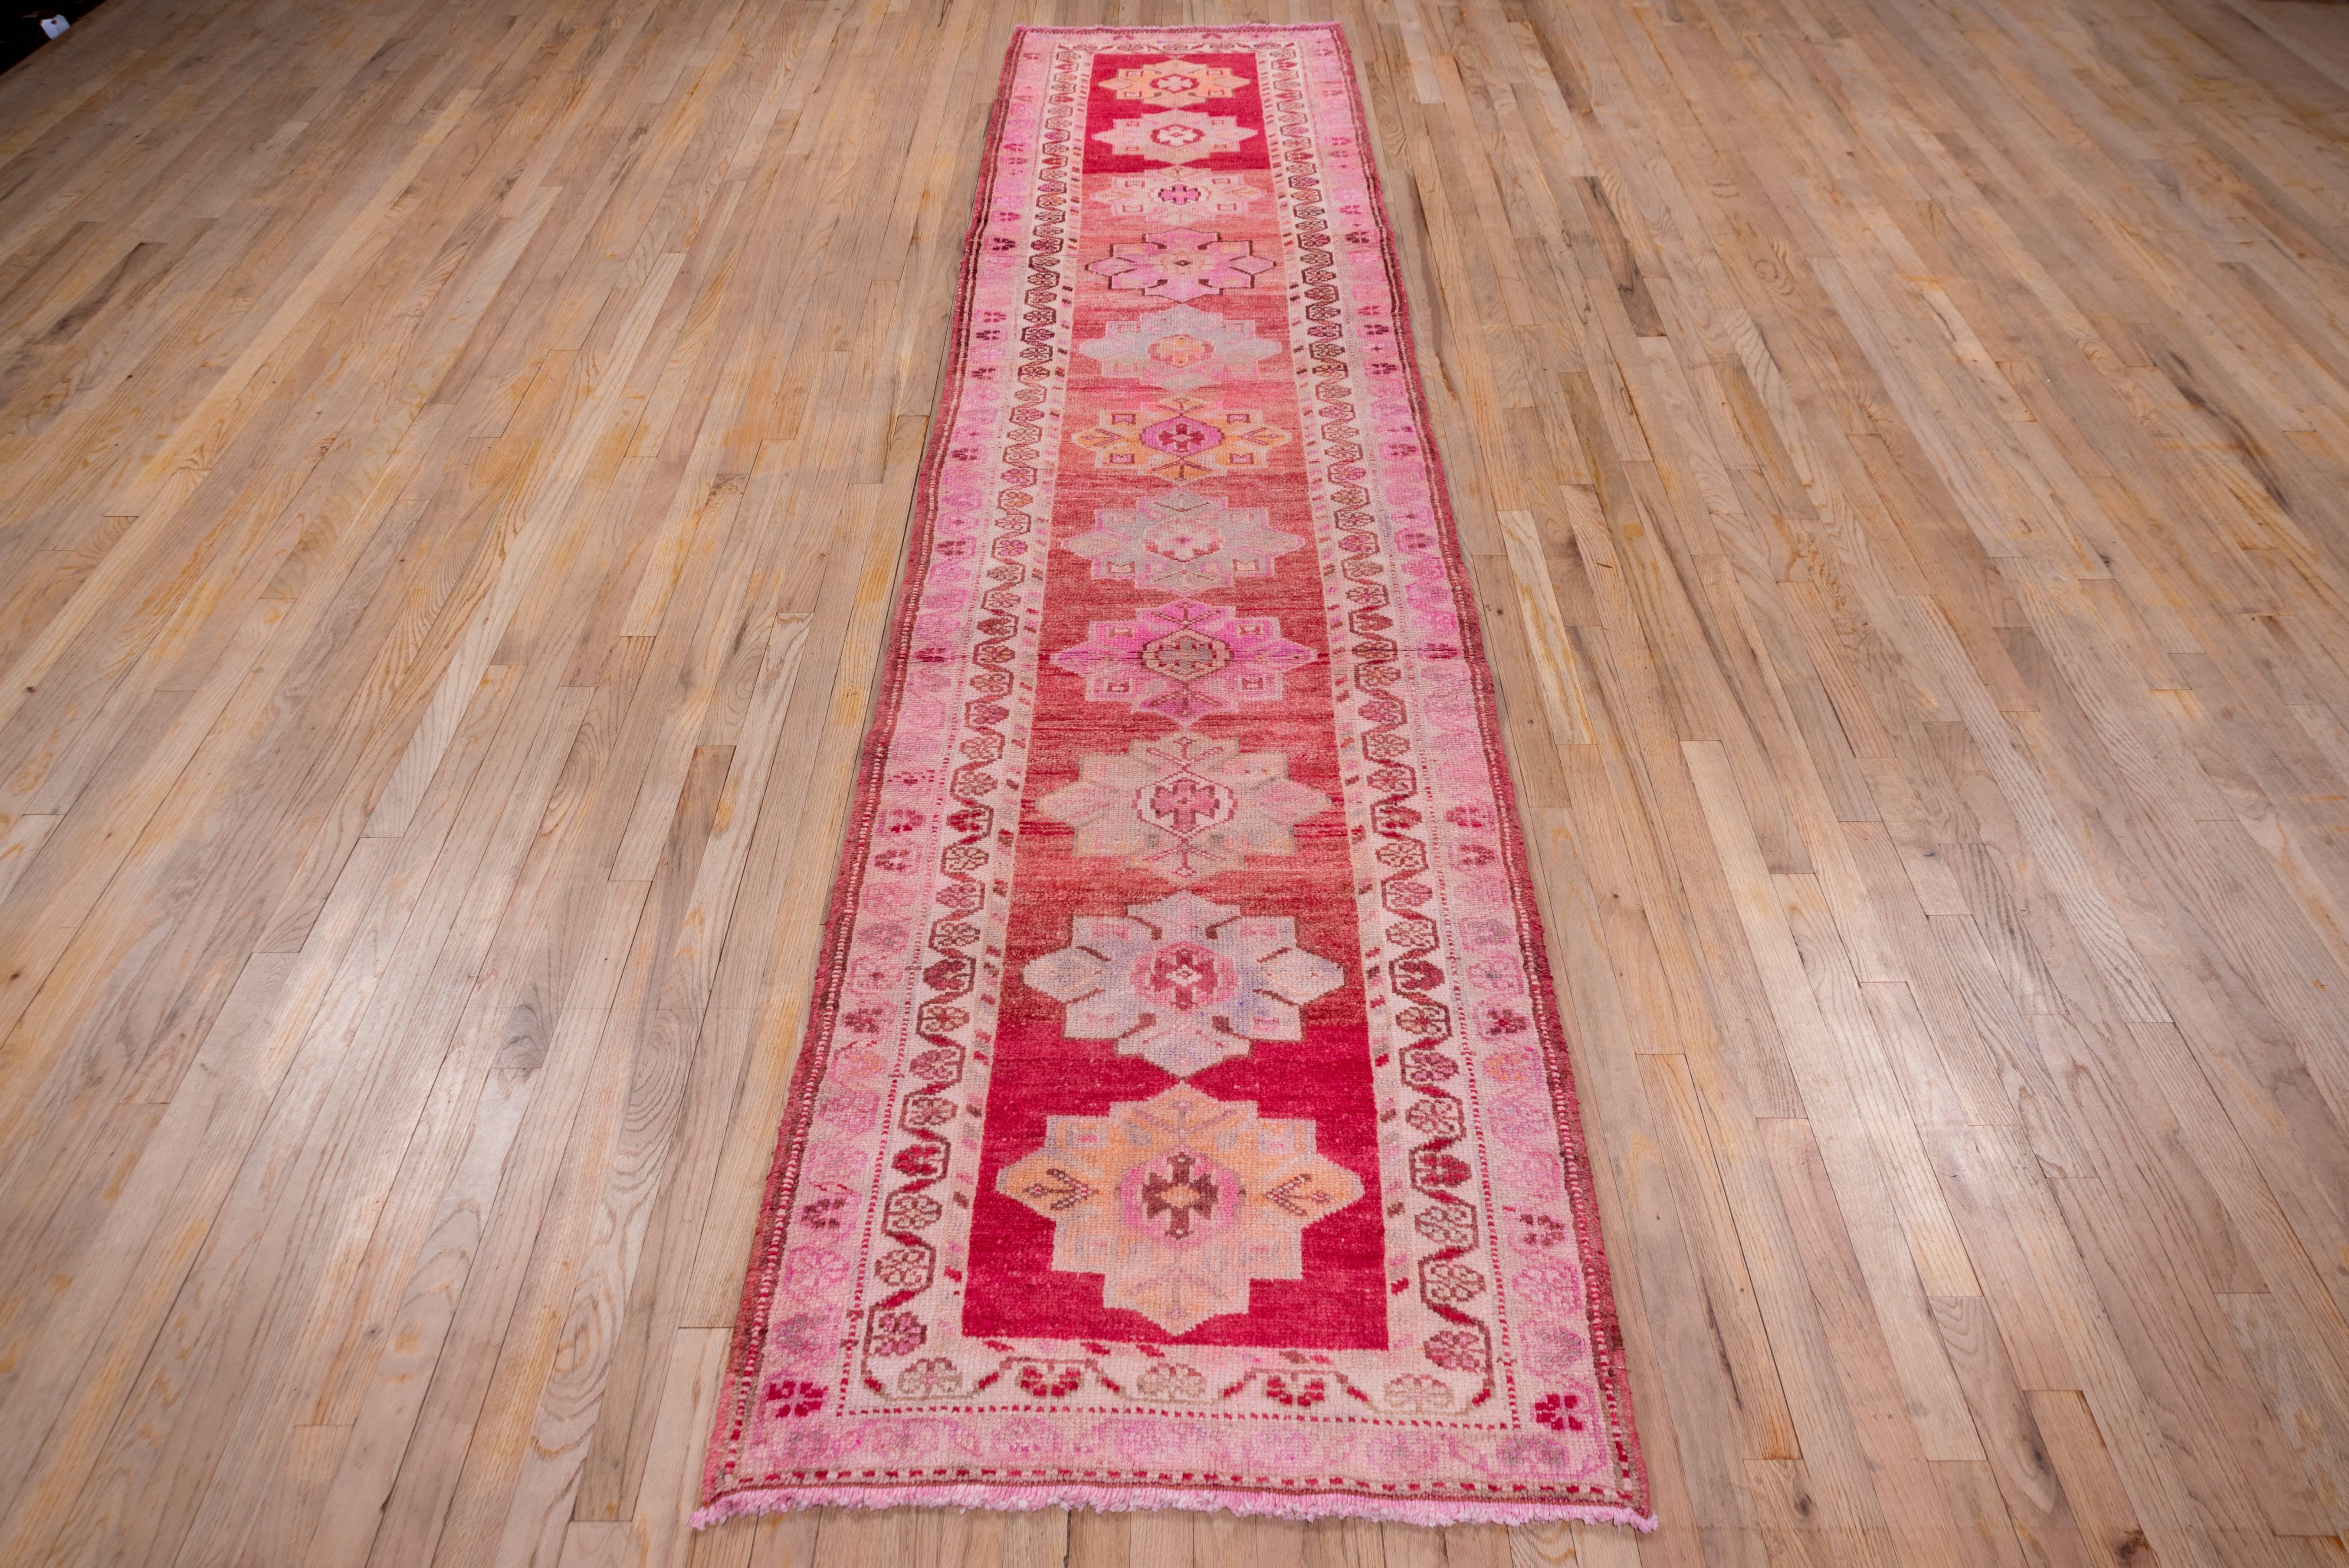 The variegated soft red field of this Anatolian displays 11 stepped diamond medallions in soft yellow, blue grey and yellow grey. The two borders both employ an undulating vine and simple palmette pattern on ivory and pale pink grounds.